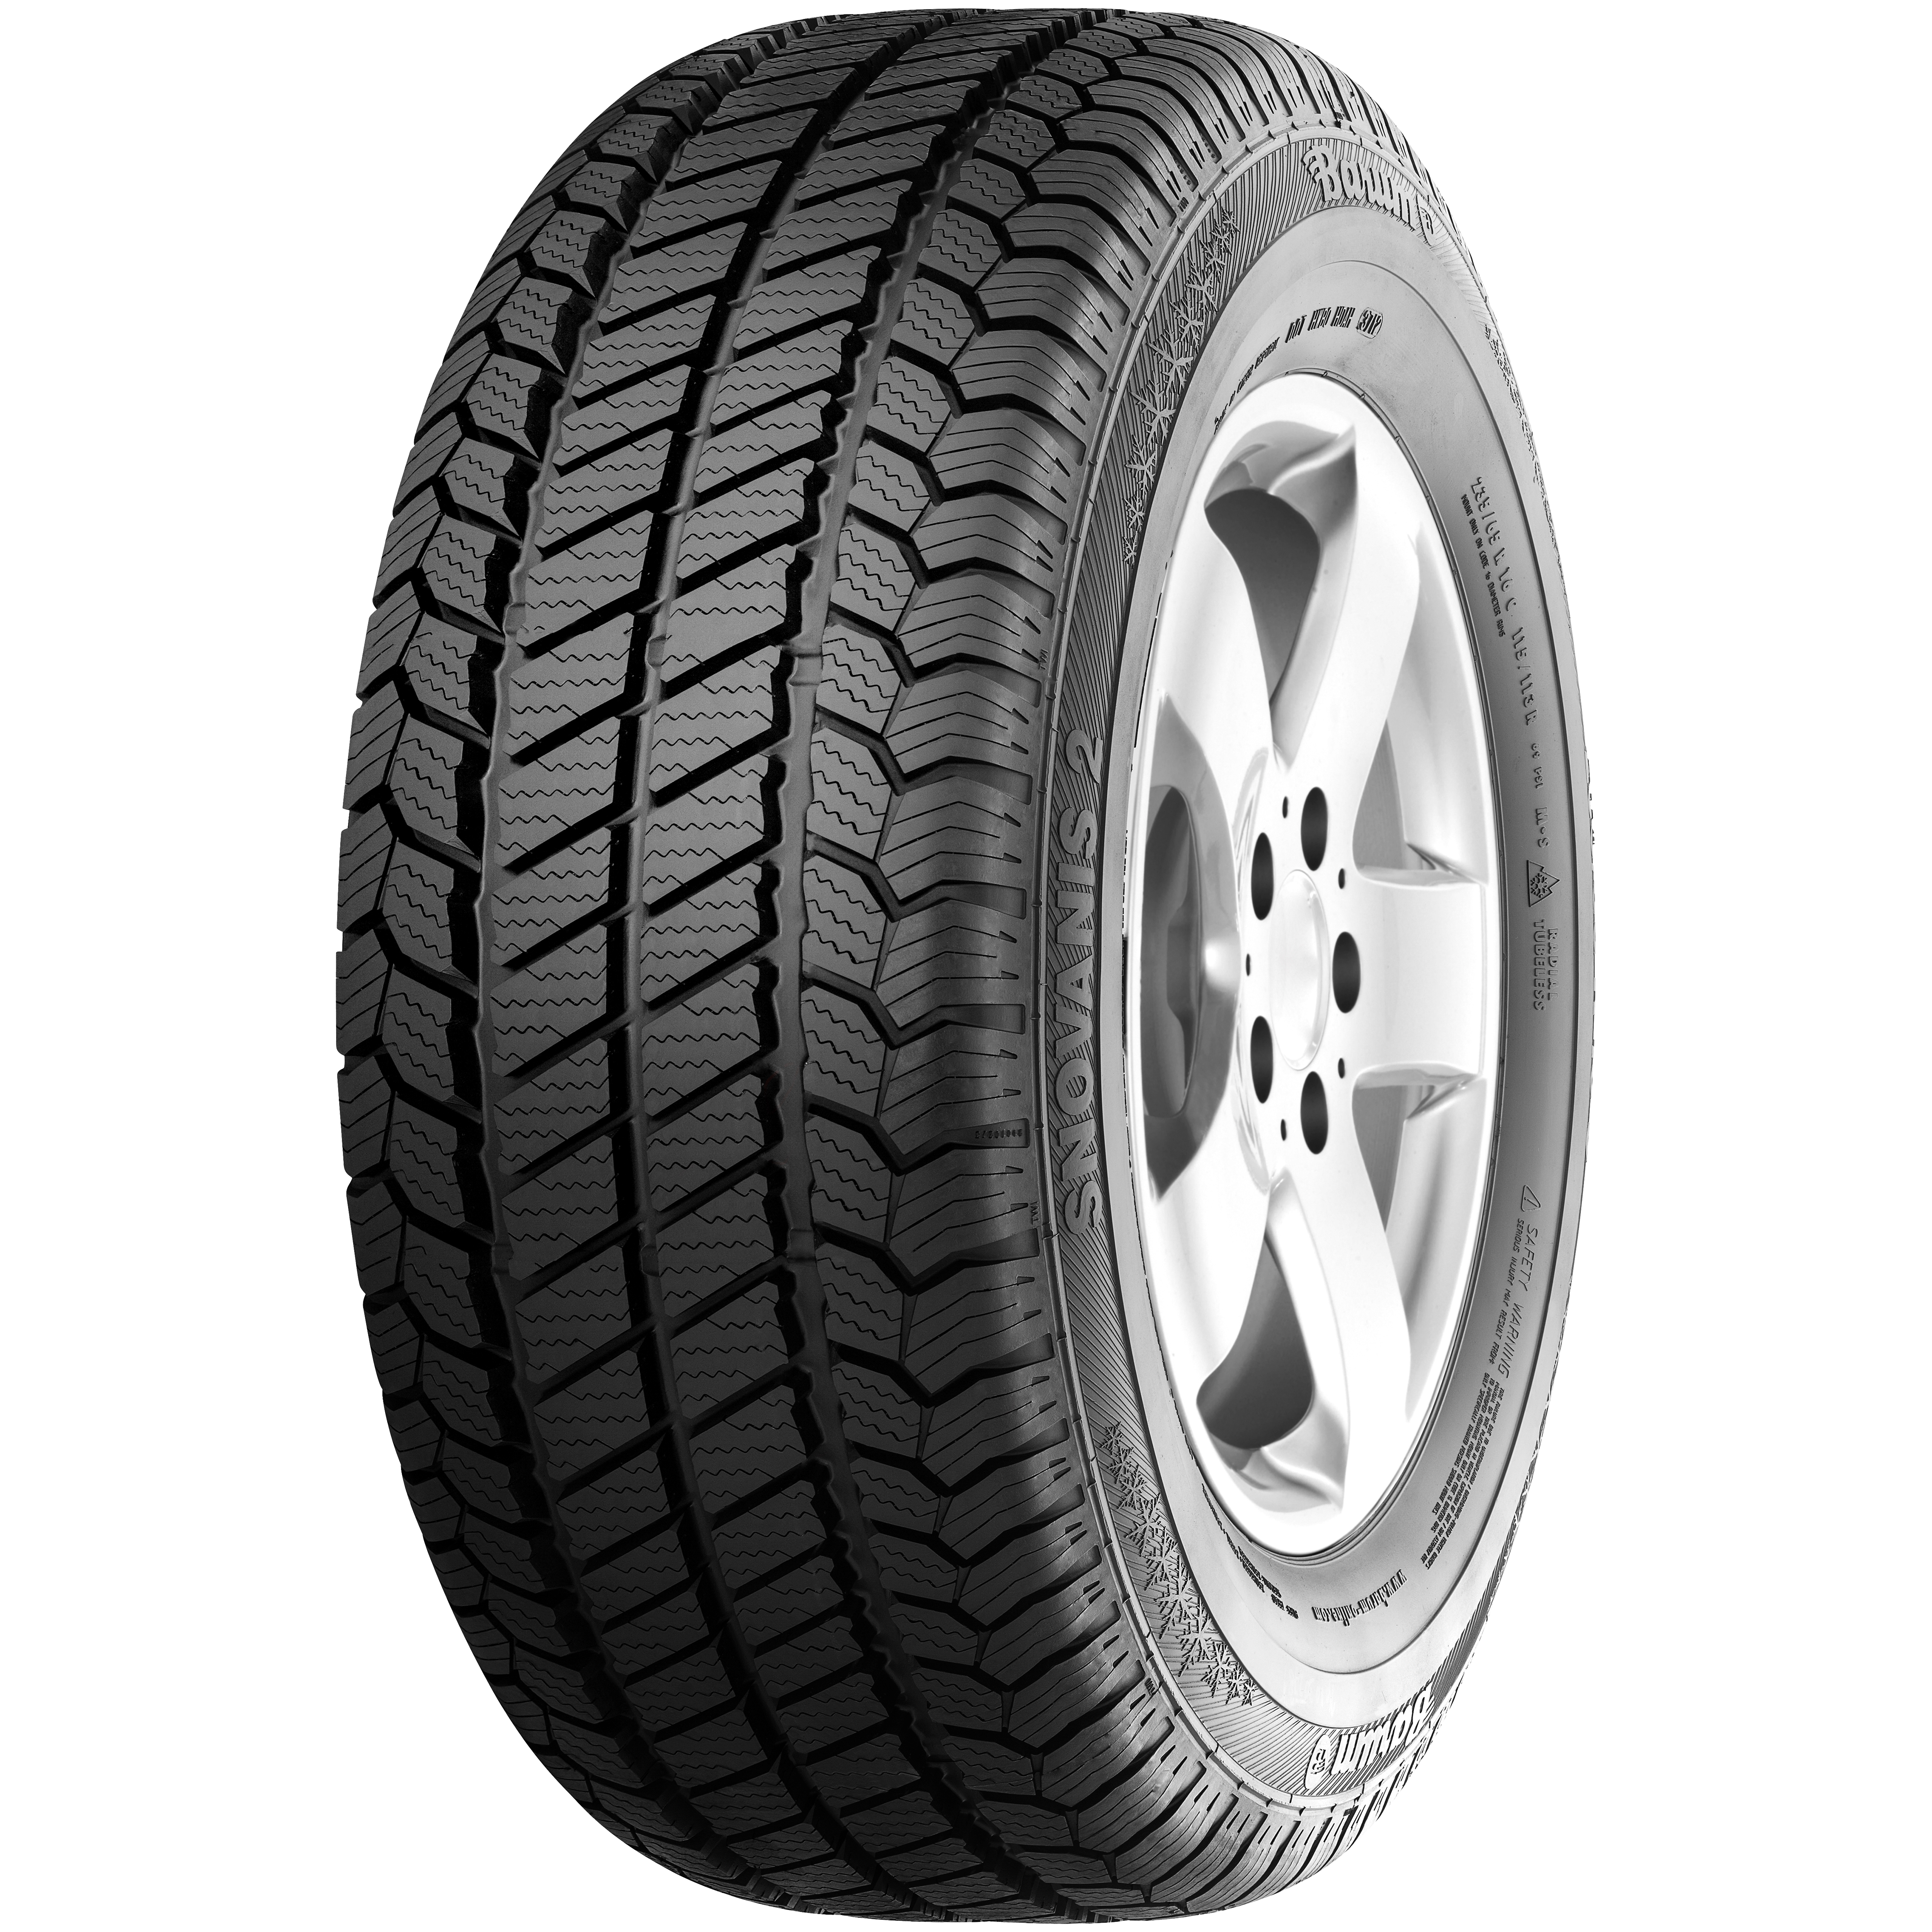 SnoVanis 2 - The winter & vans Barum for roads for | tyre transporters snow-covered